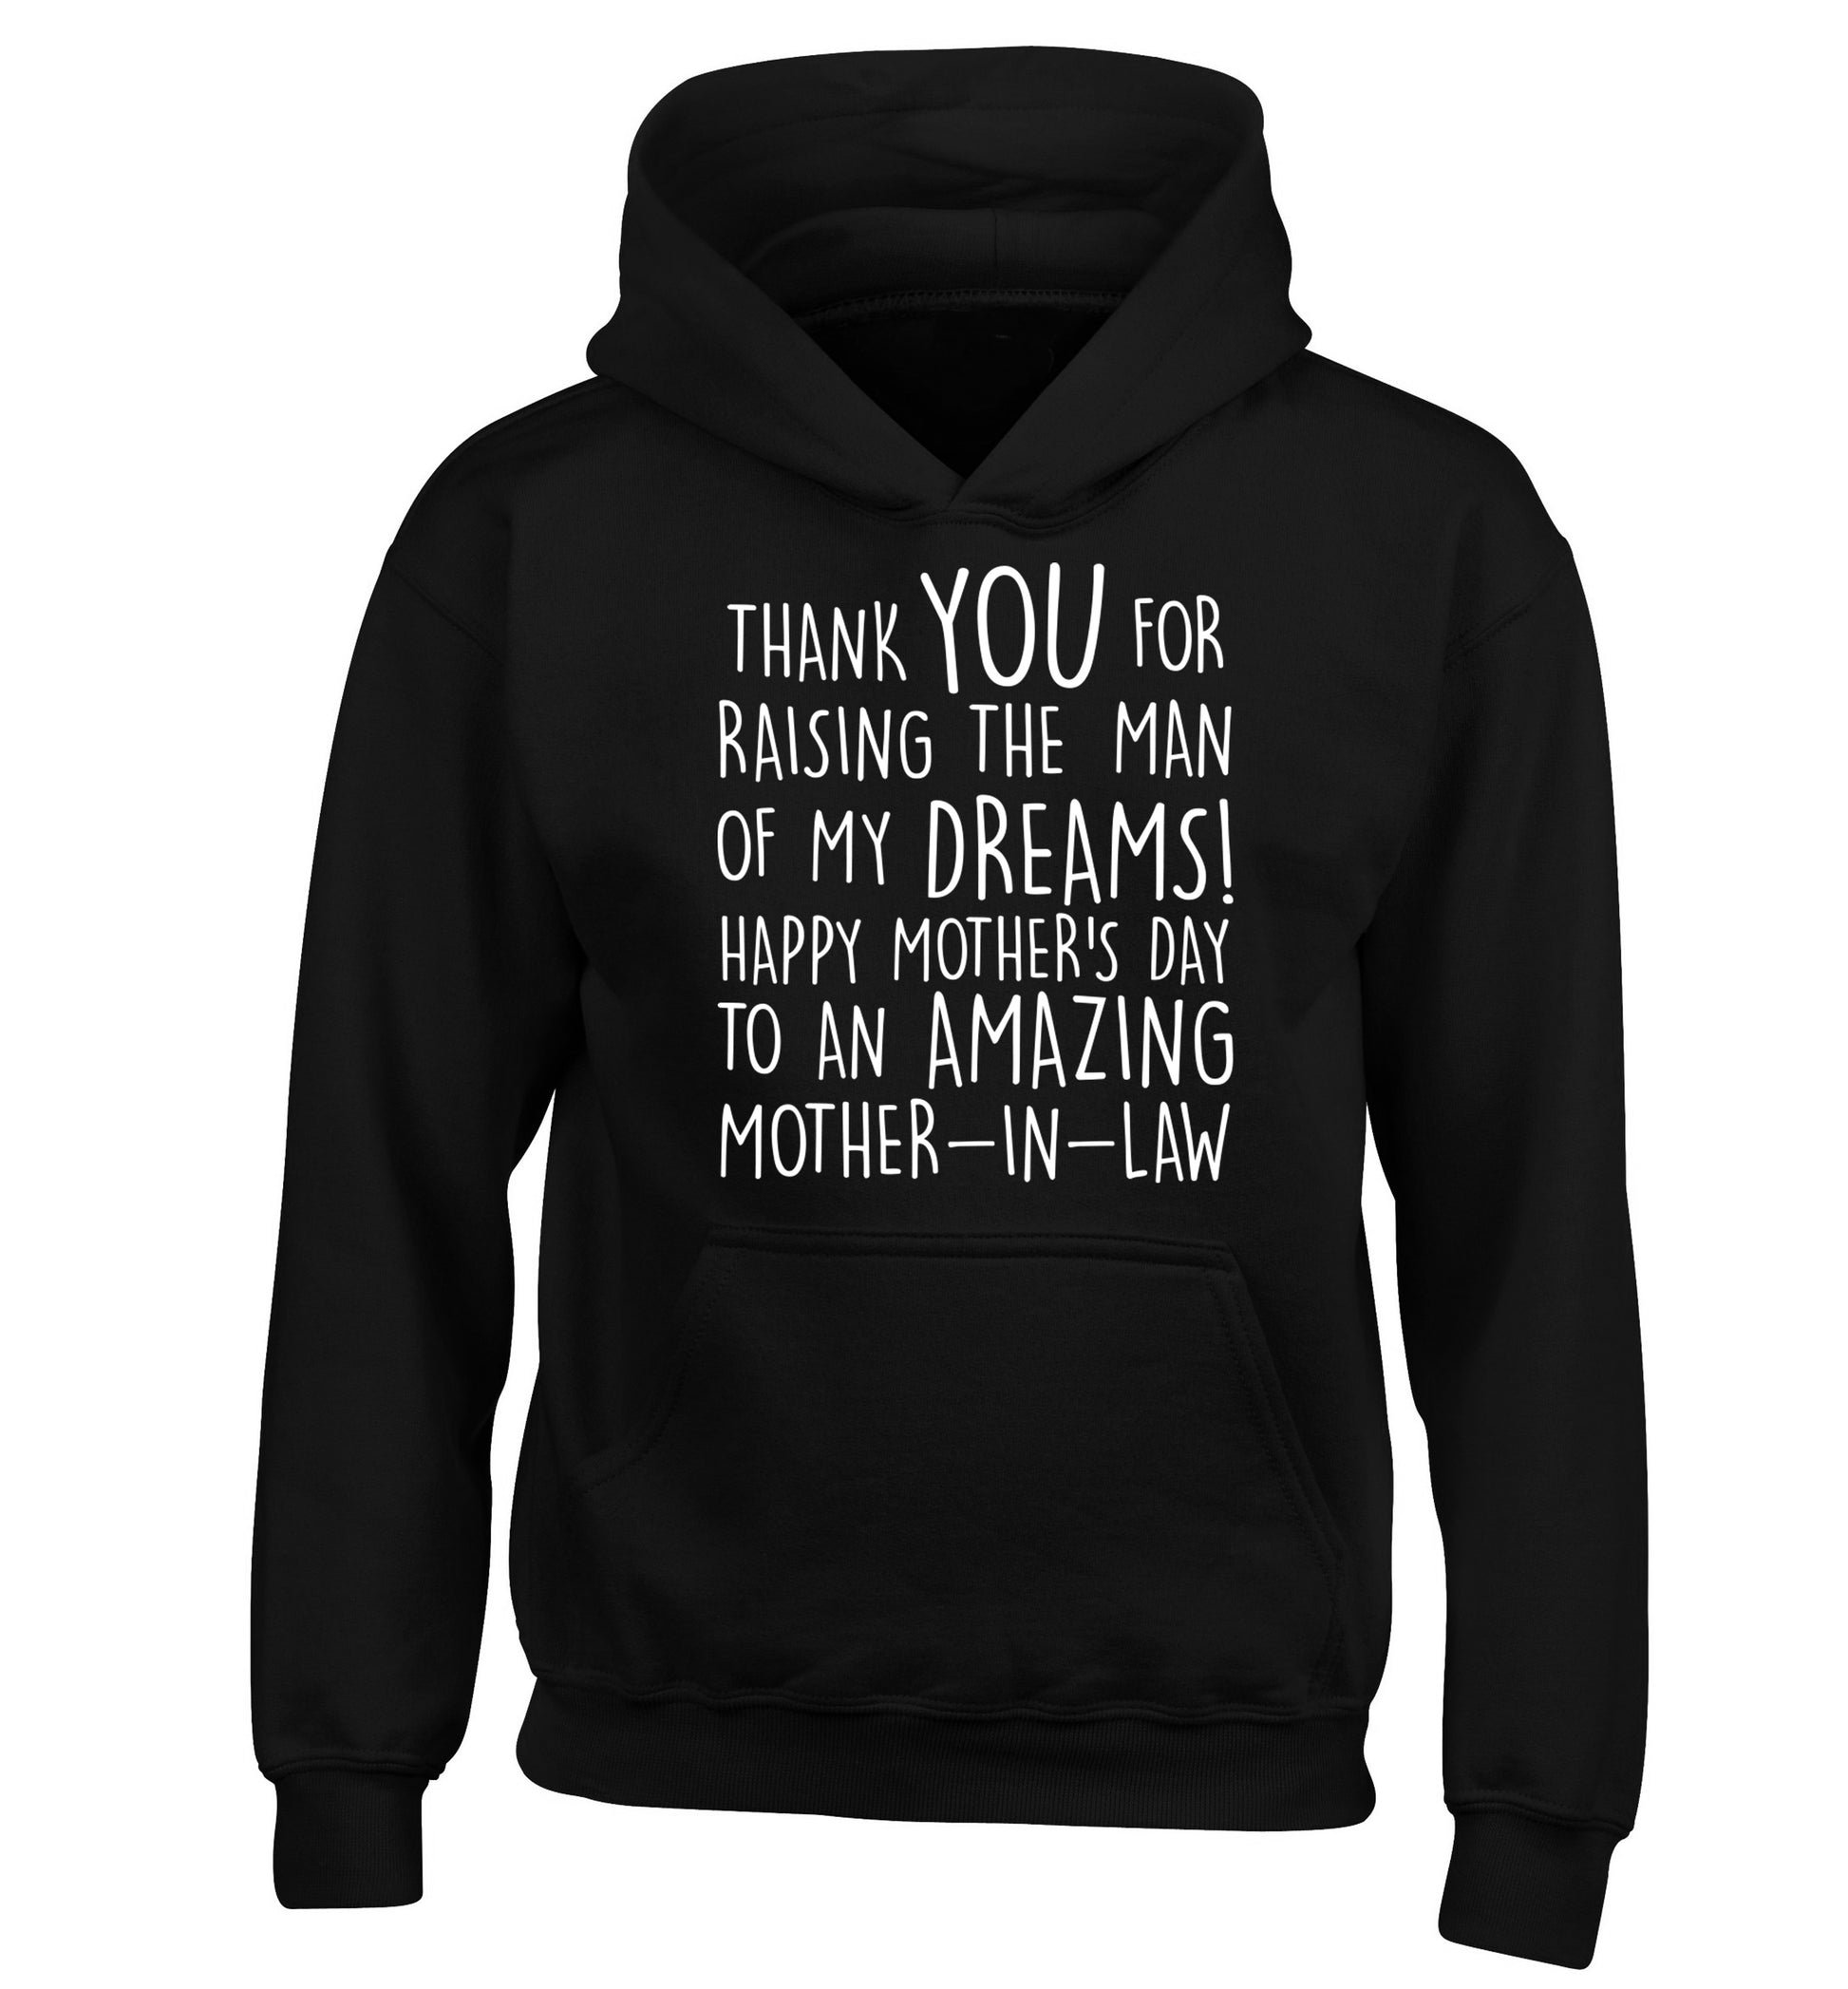 Thank you for raising the man of my dreams happy mother's day mother-in-law children's black hoodie 12-13 Years